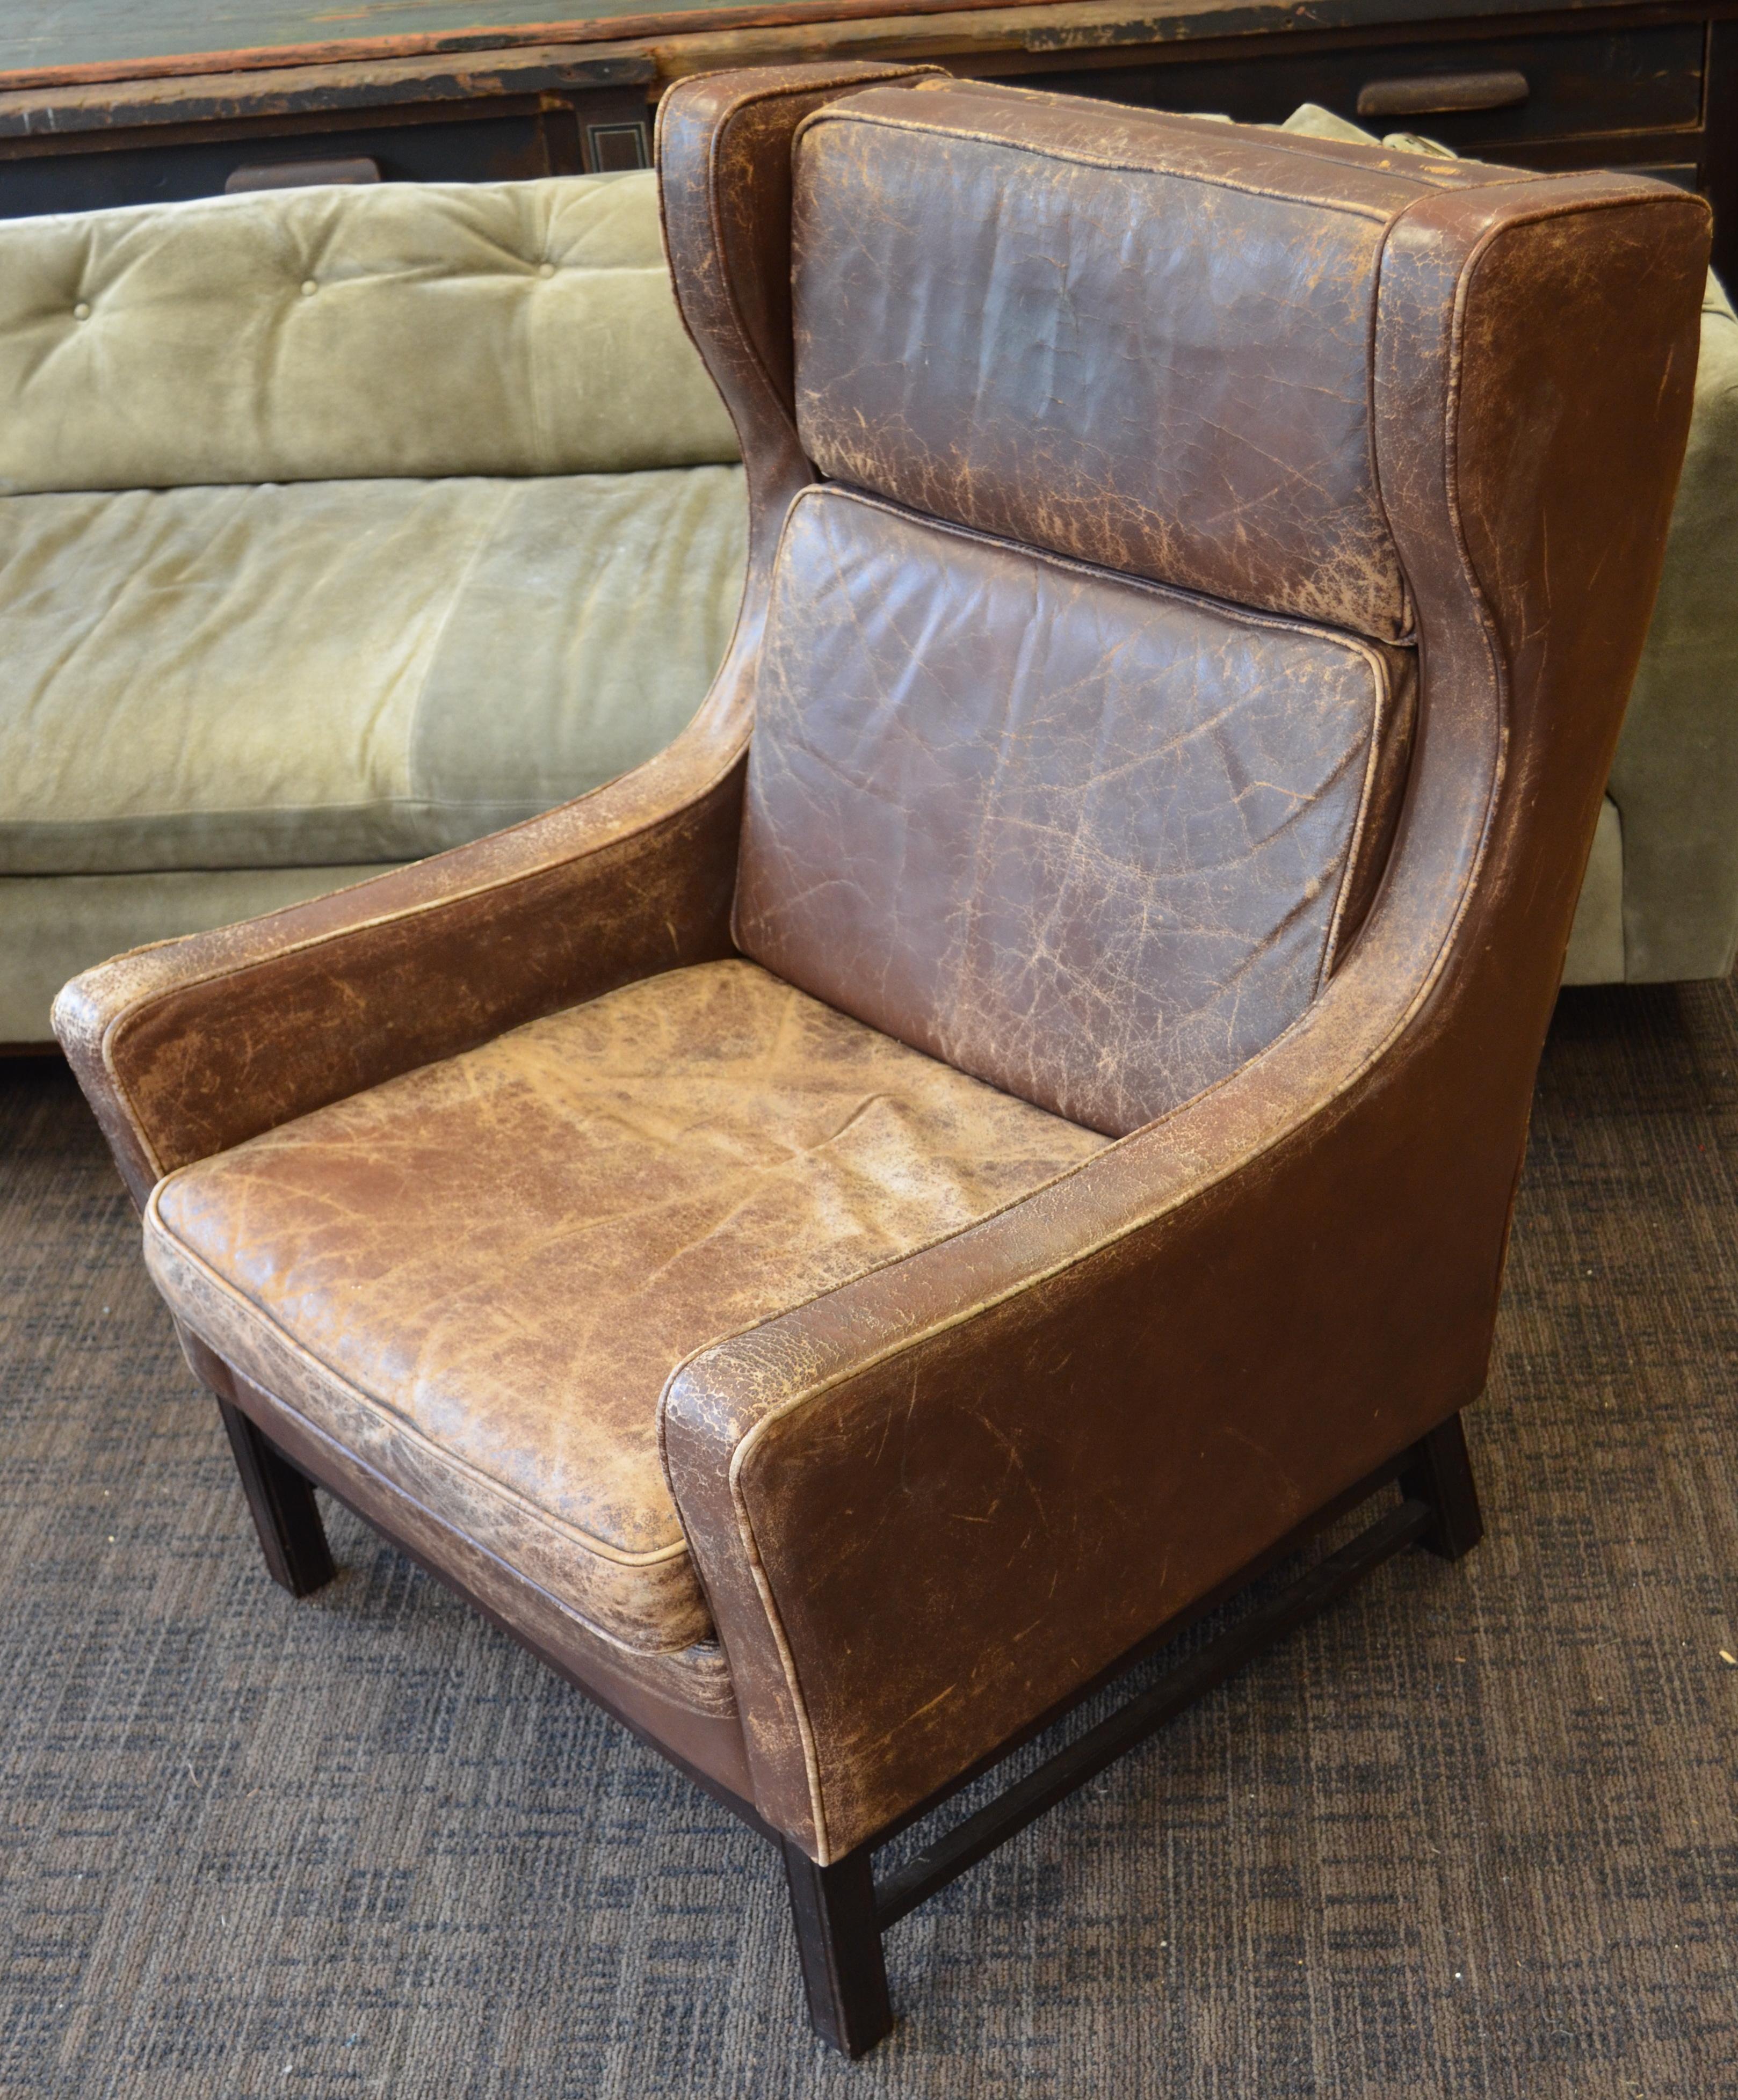 Club Chair of Worn Leather from Edwardian England, Wingback, Early 20th Century For Sale 5